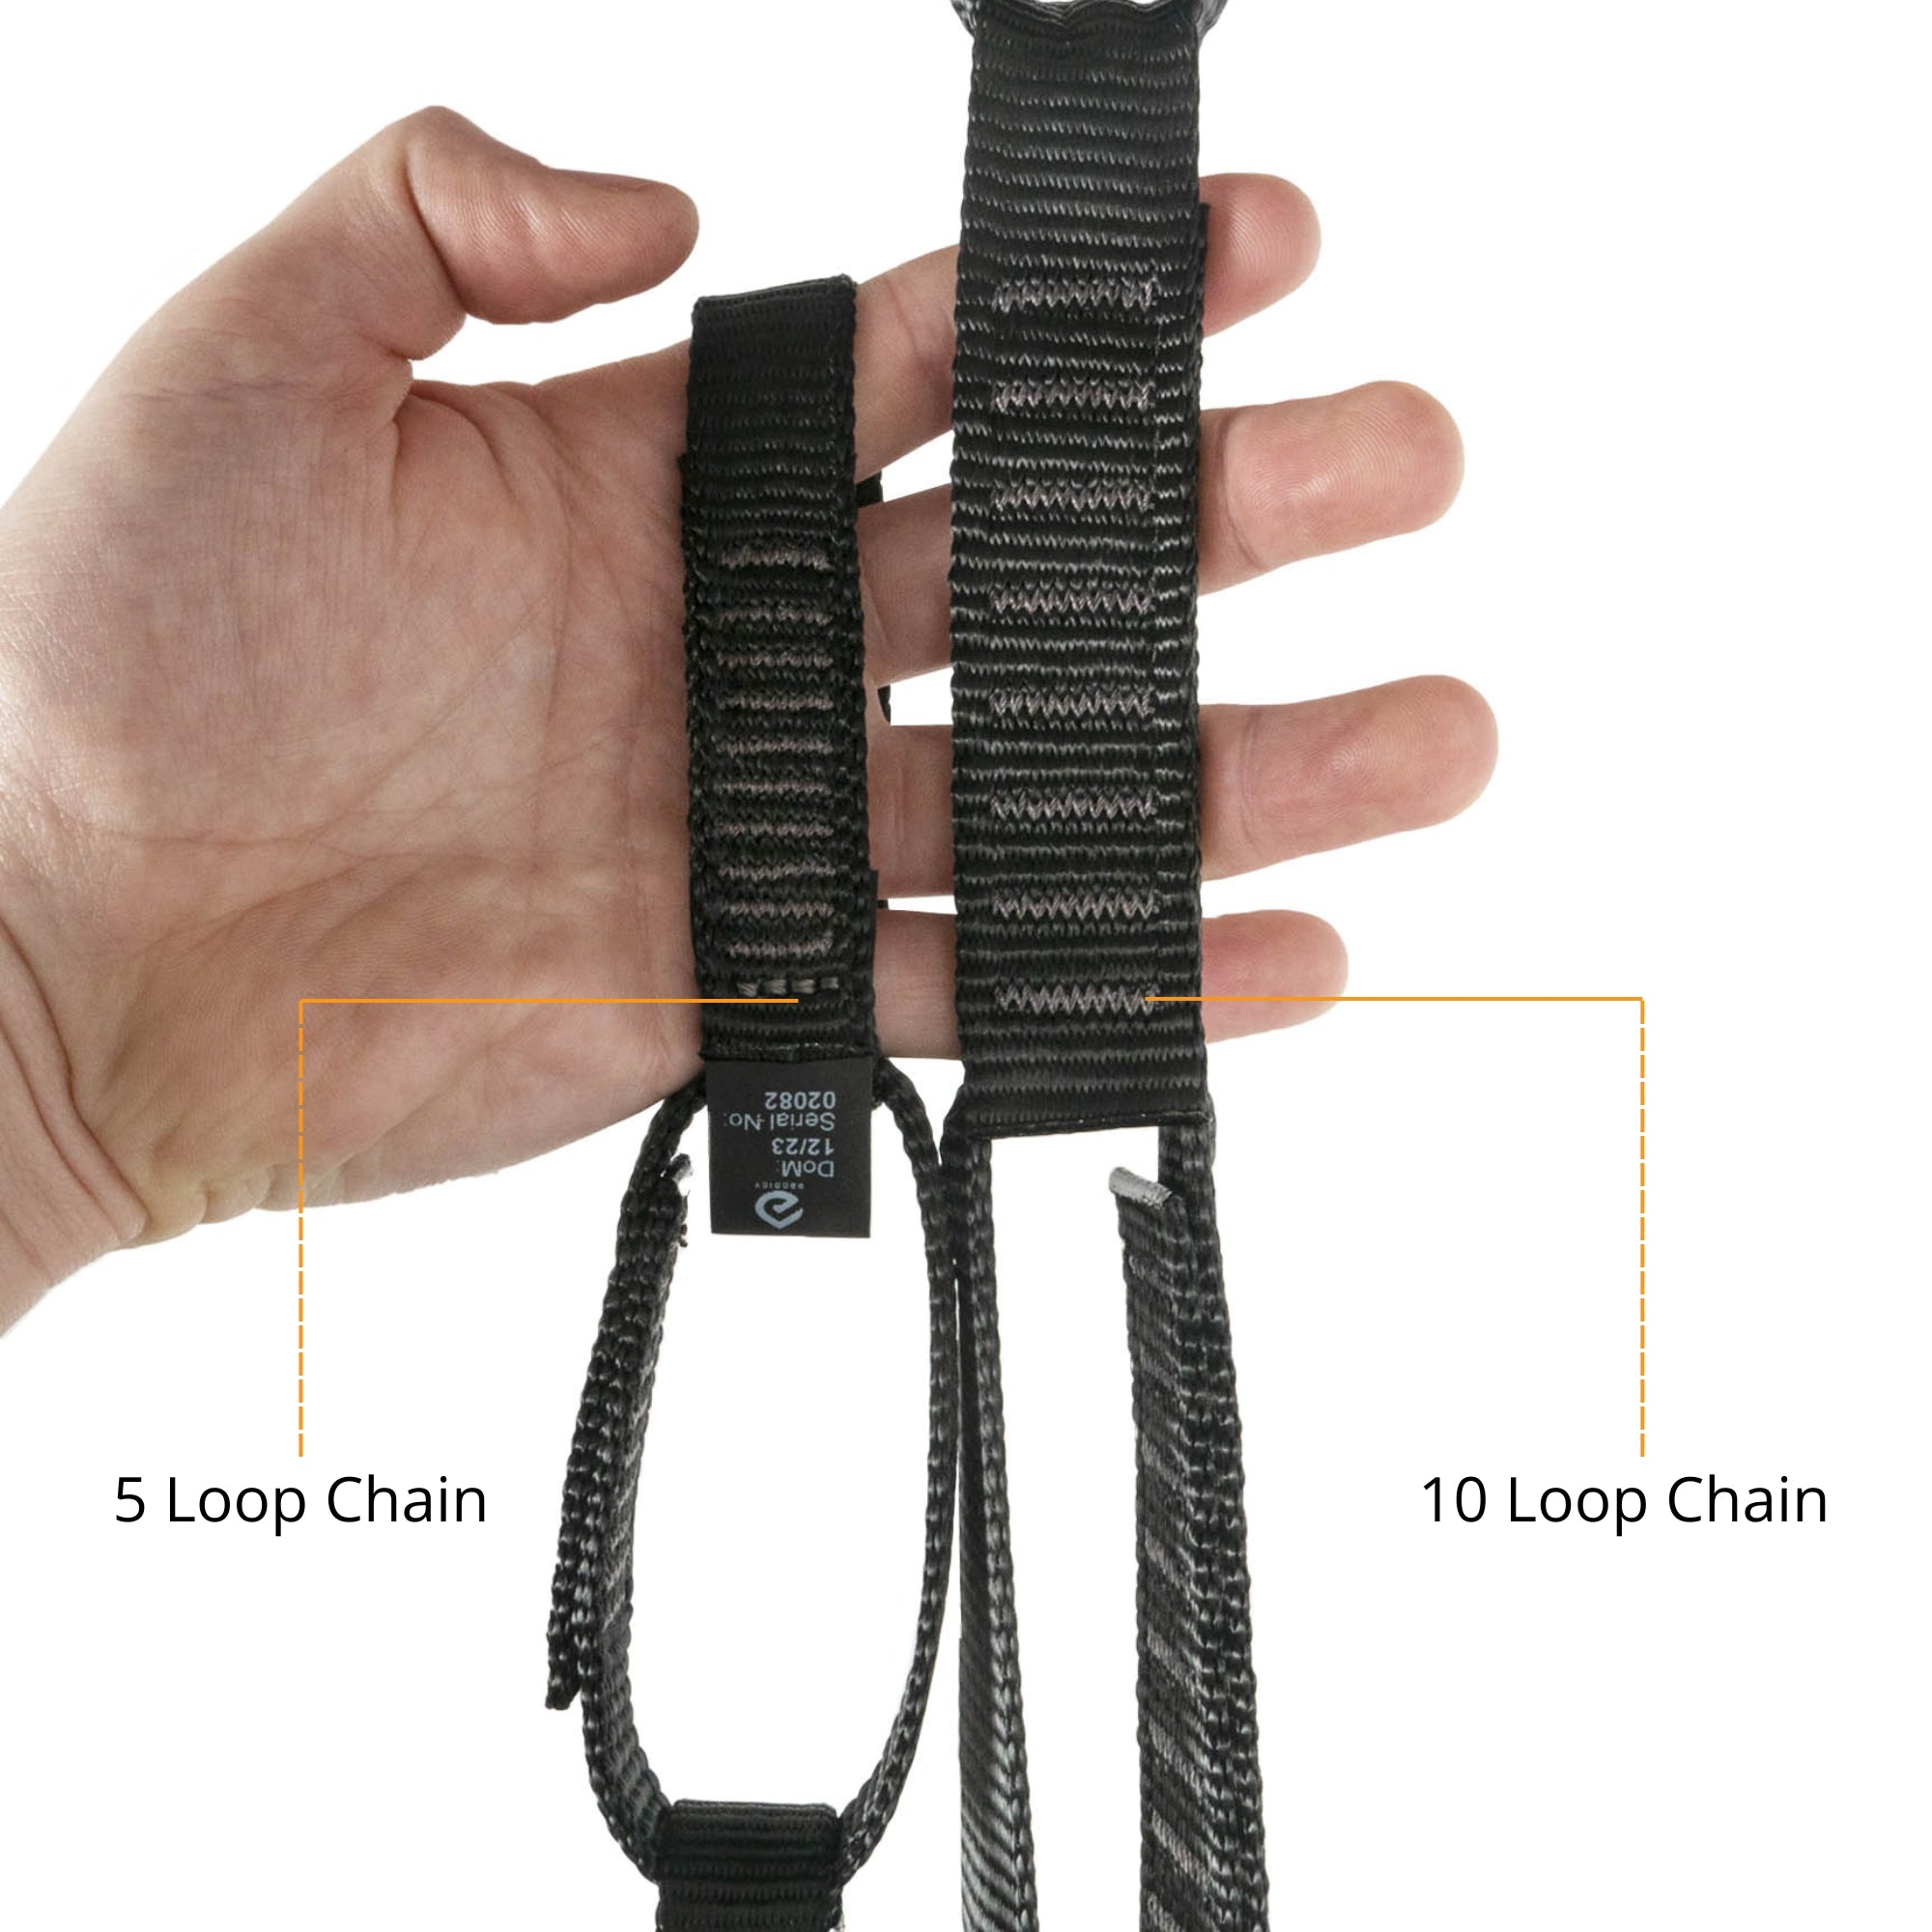 comparison between a 10 loop chain and 5 loop chain